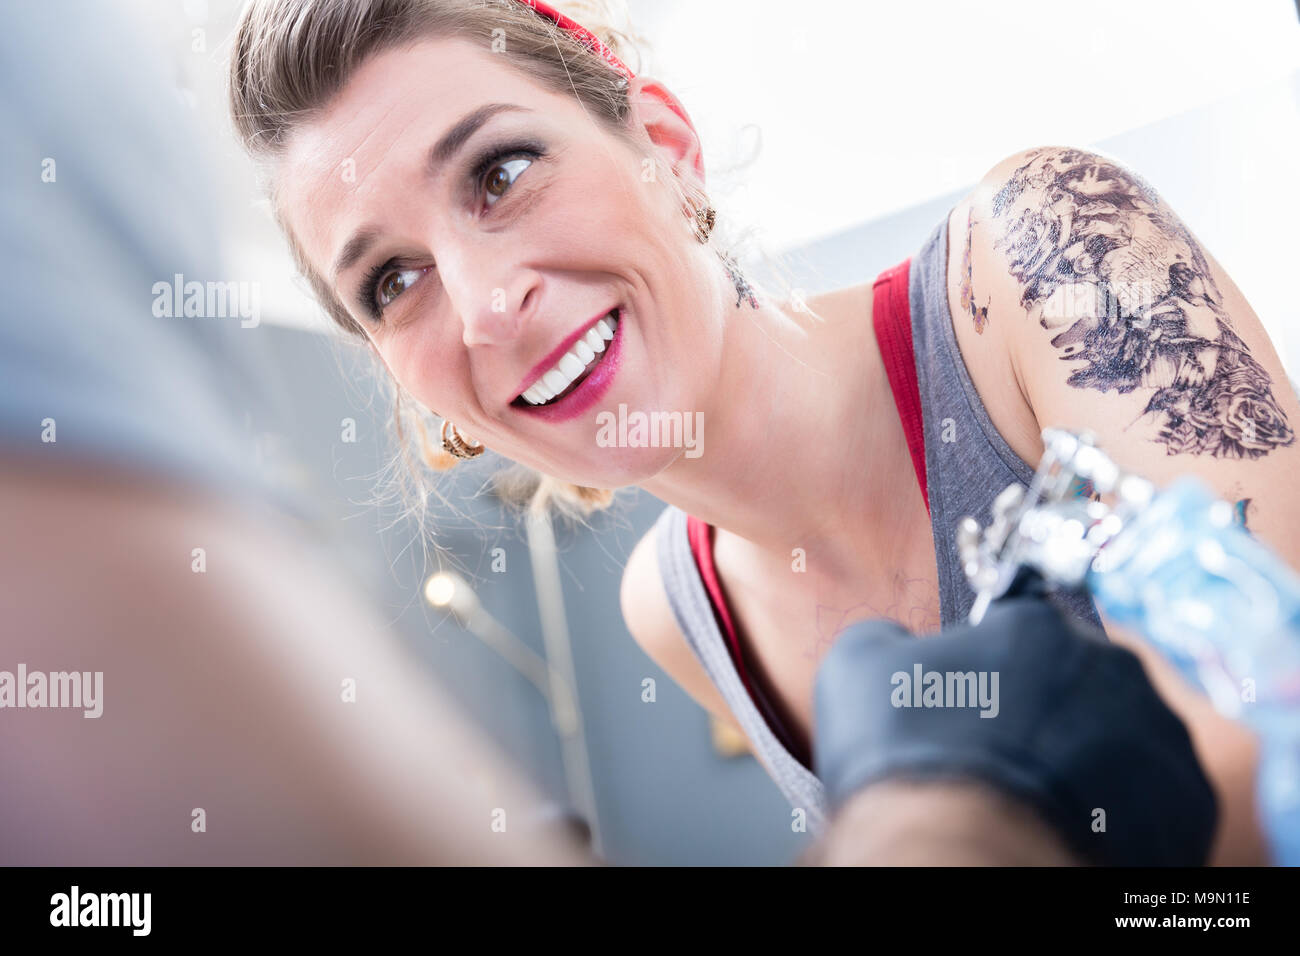 Cheerful woman smiling with confidence in a modern tattoo studio Stock Photo